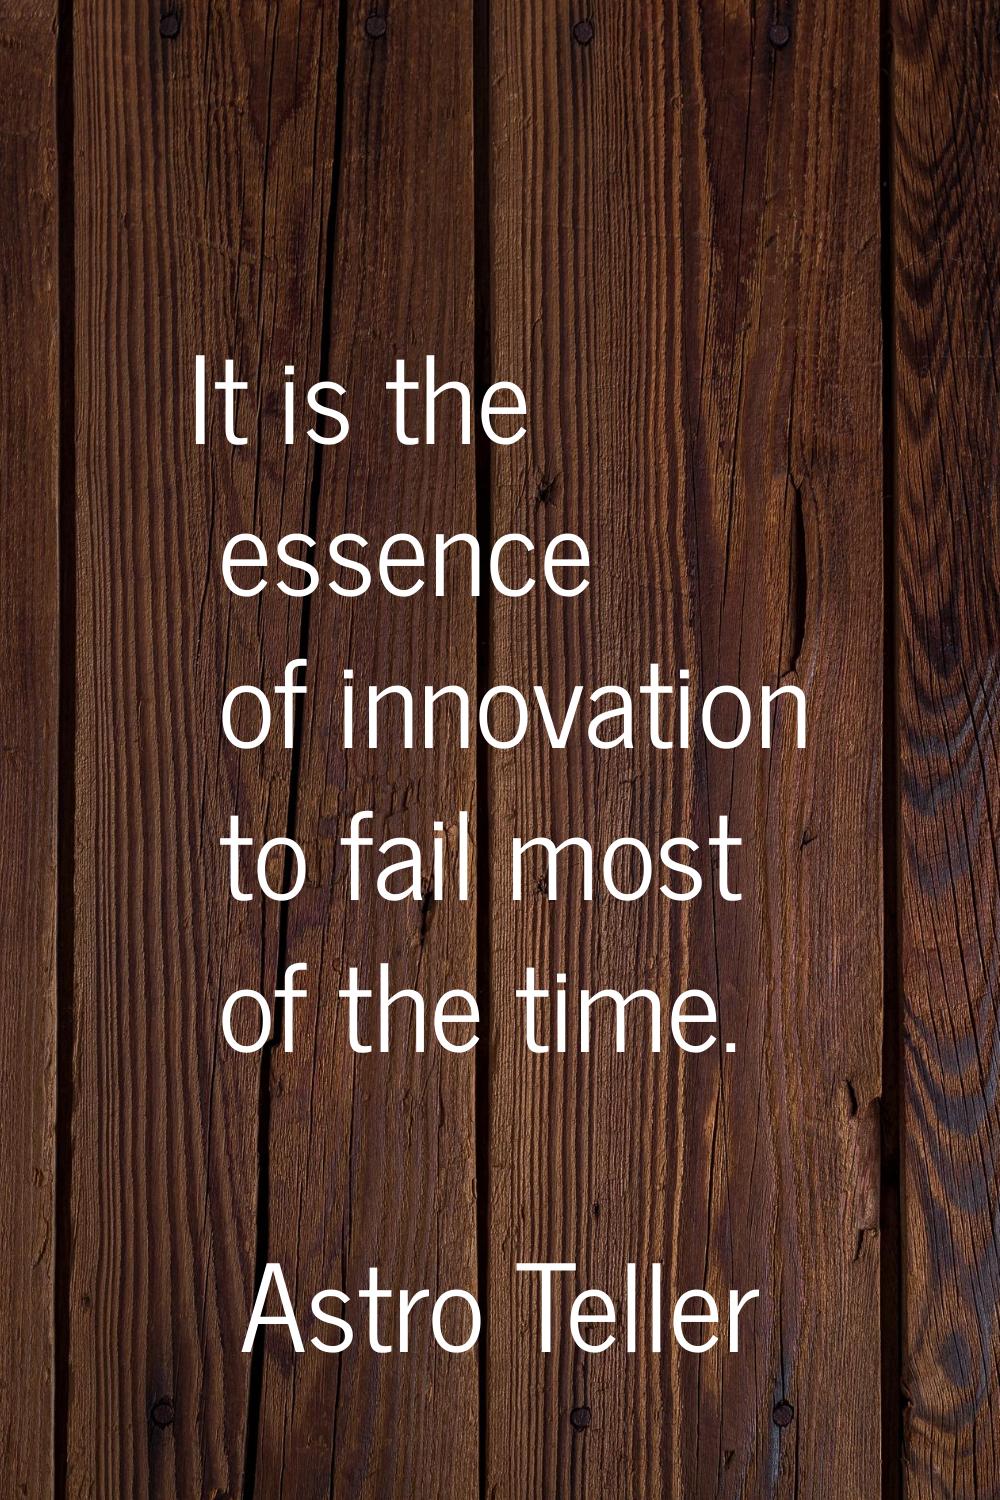 It is the essence of innovation to fail most of the time.